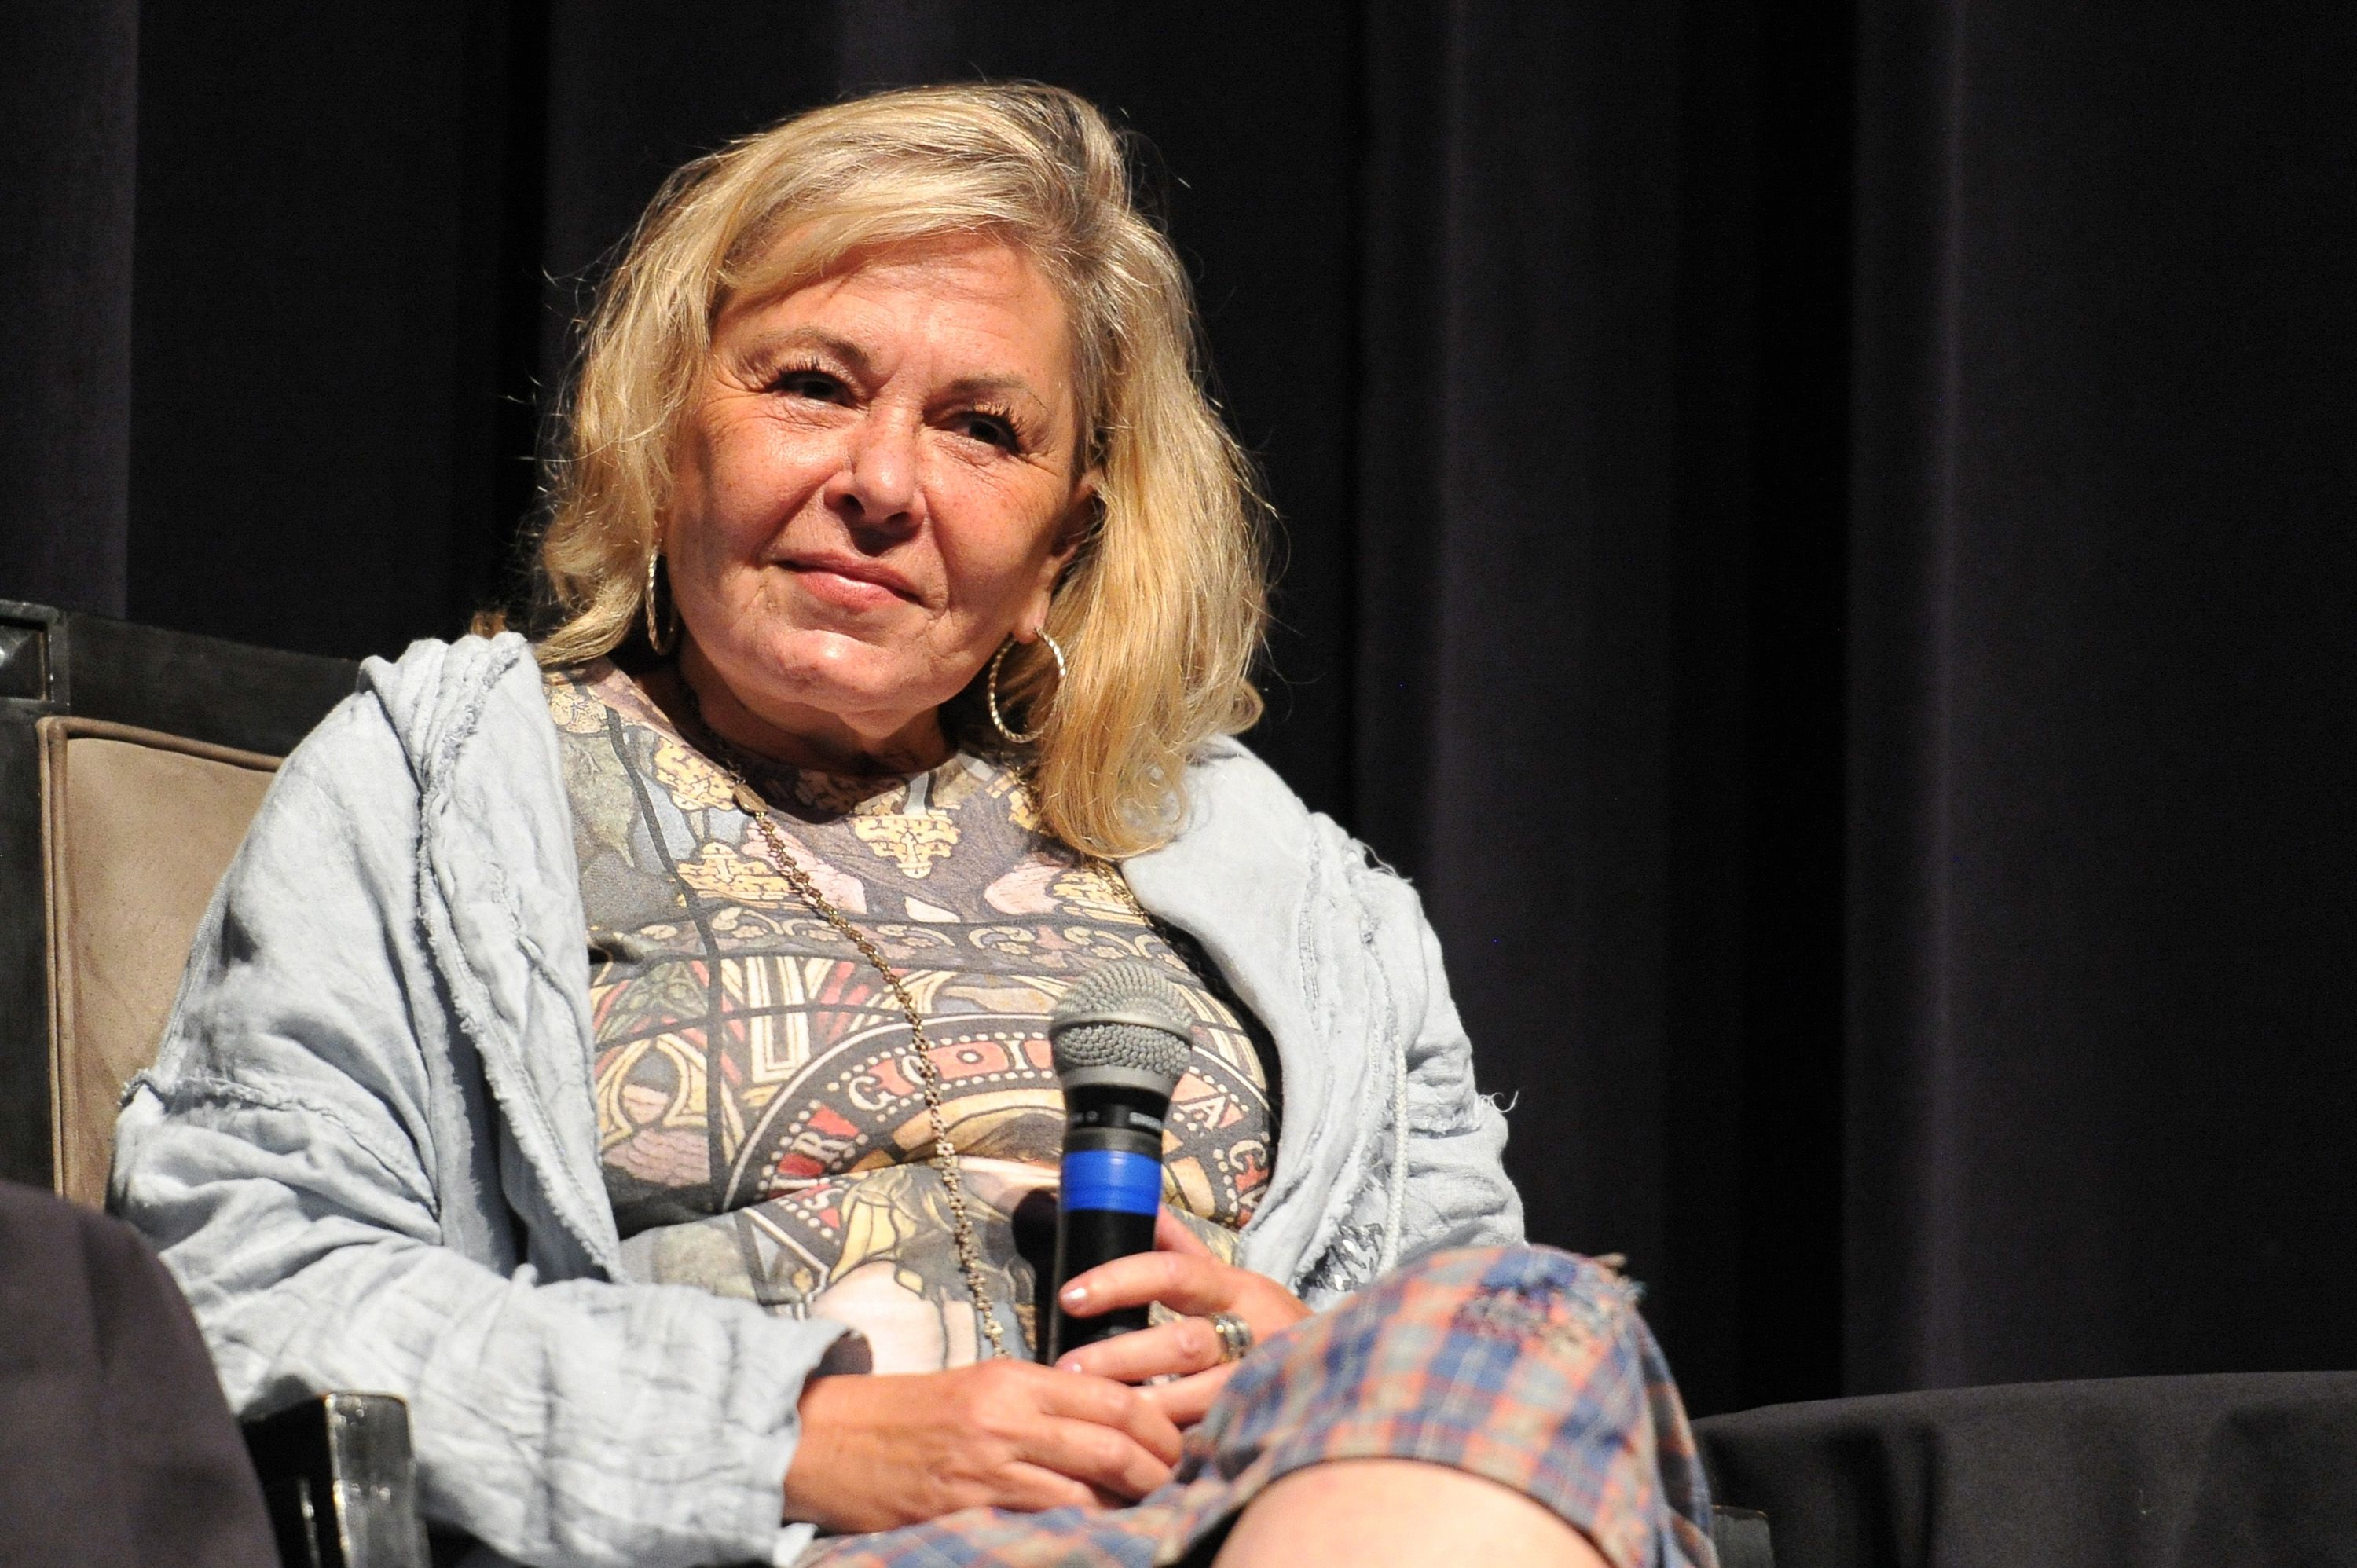 Roseanne Barr in "Is America a Forgiving Nation?" at Saban Theatre on September 17, 2018, in Beverly Hills, California. | Source: Getty Images